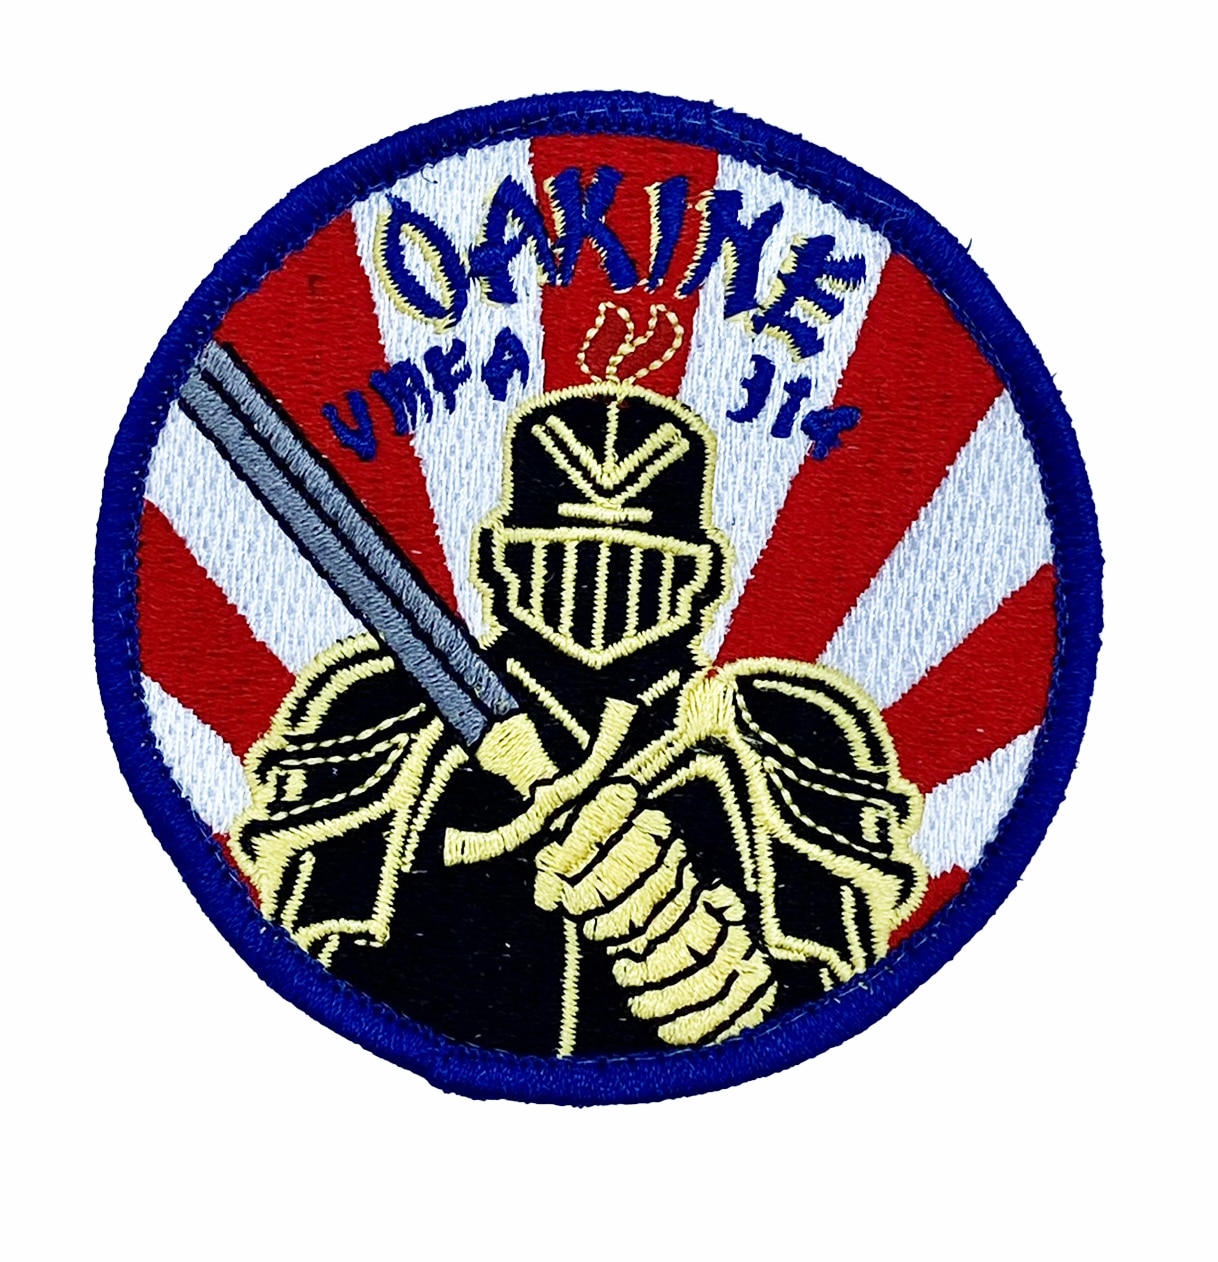 VMFA-314 Black Knights 2022 Cruise Patch - With Hook and Loop